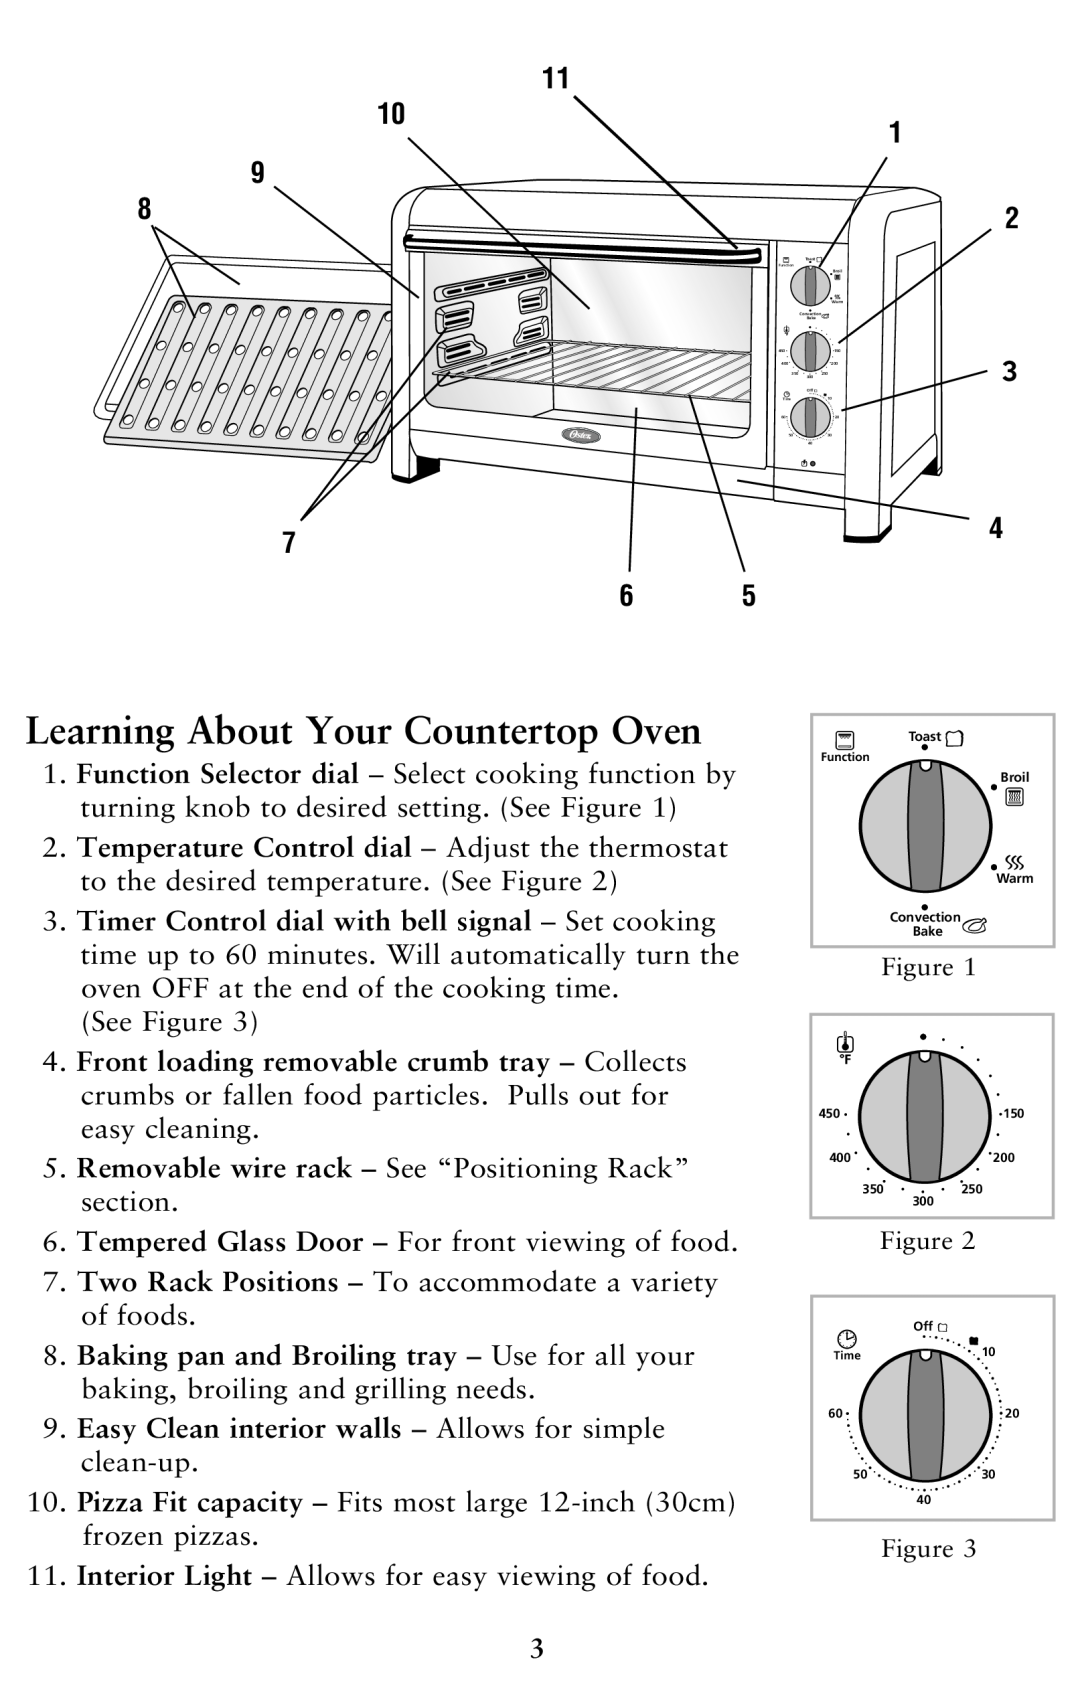 Oster 128263, 6079 user manual Learning About Your Countertop Oven, Easy Clean interior walls - Allows for simple clean-up 